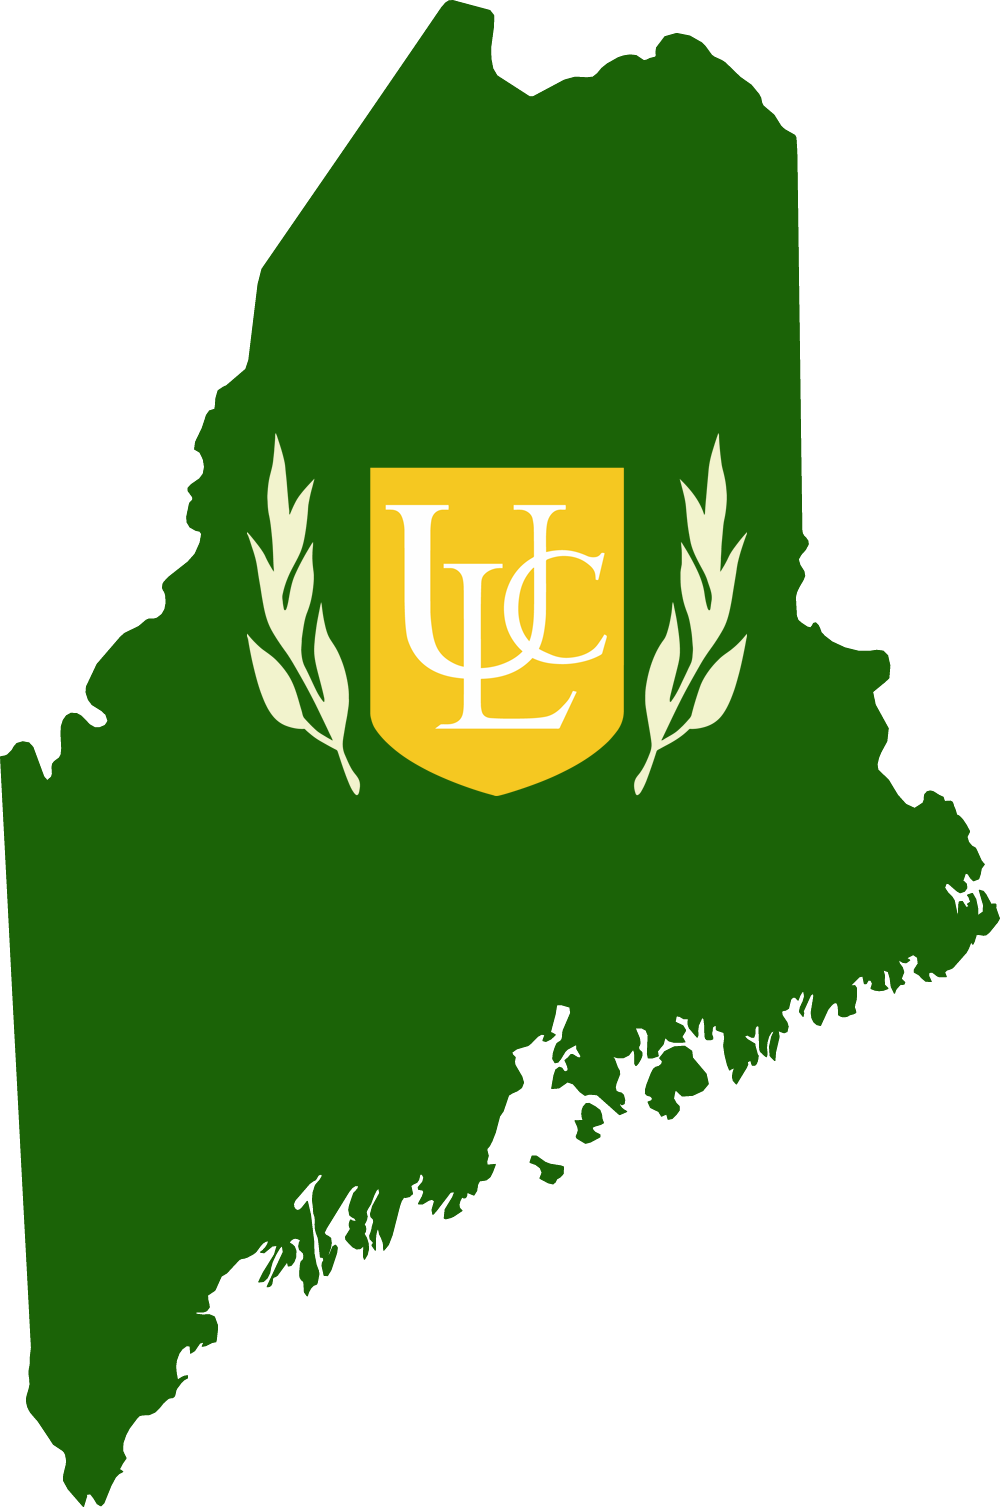 An outline of ME with the ULC logo